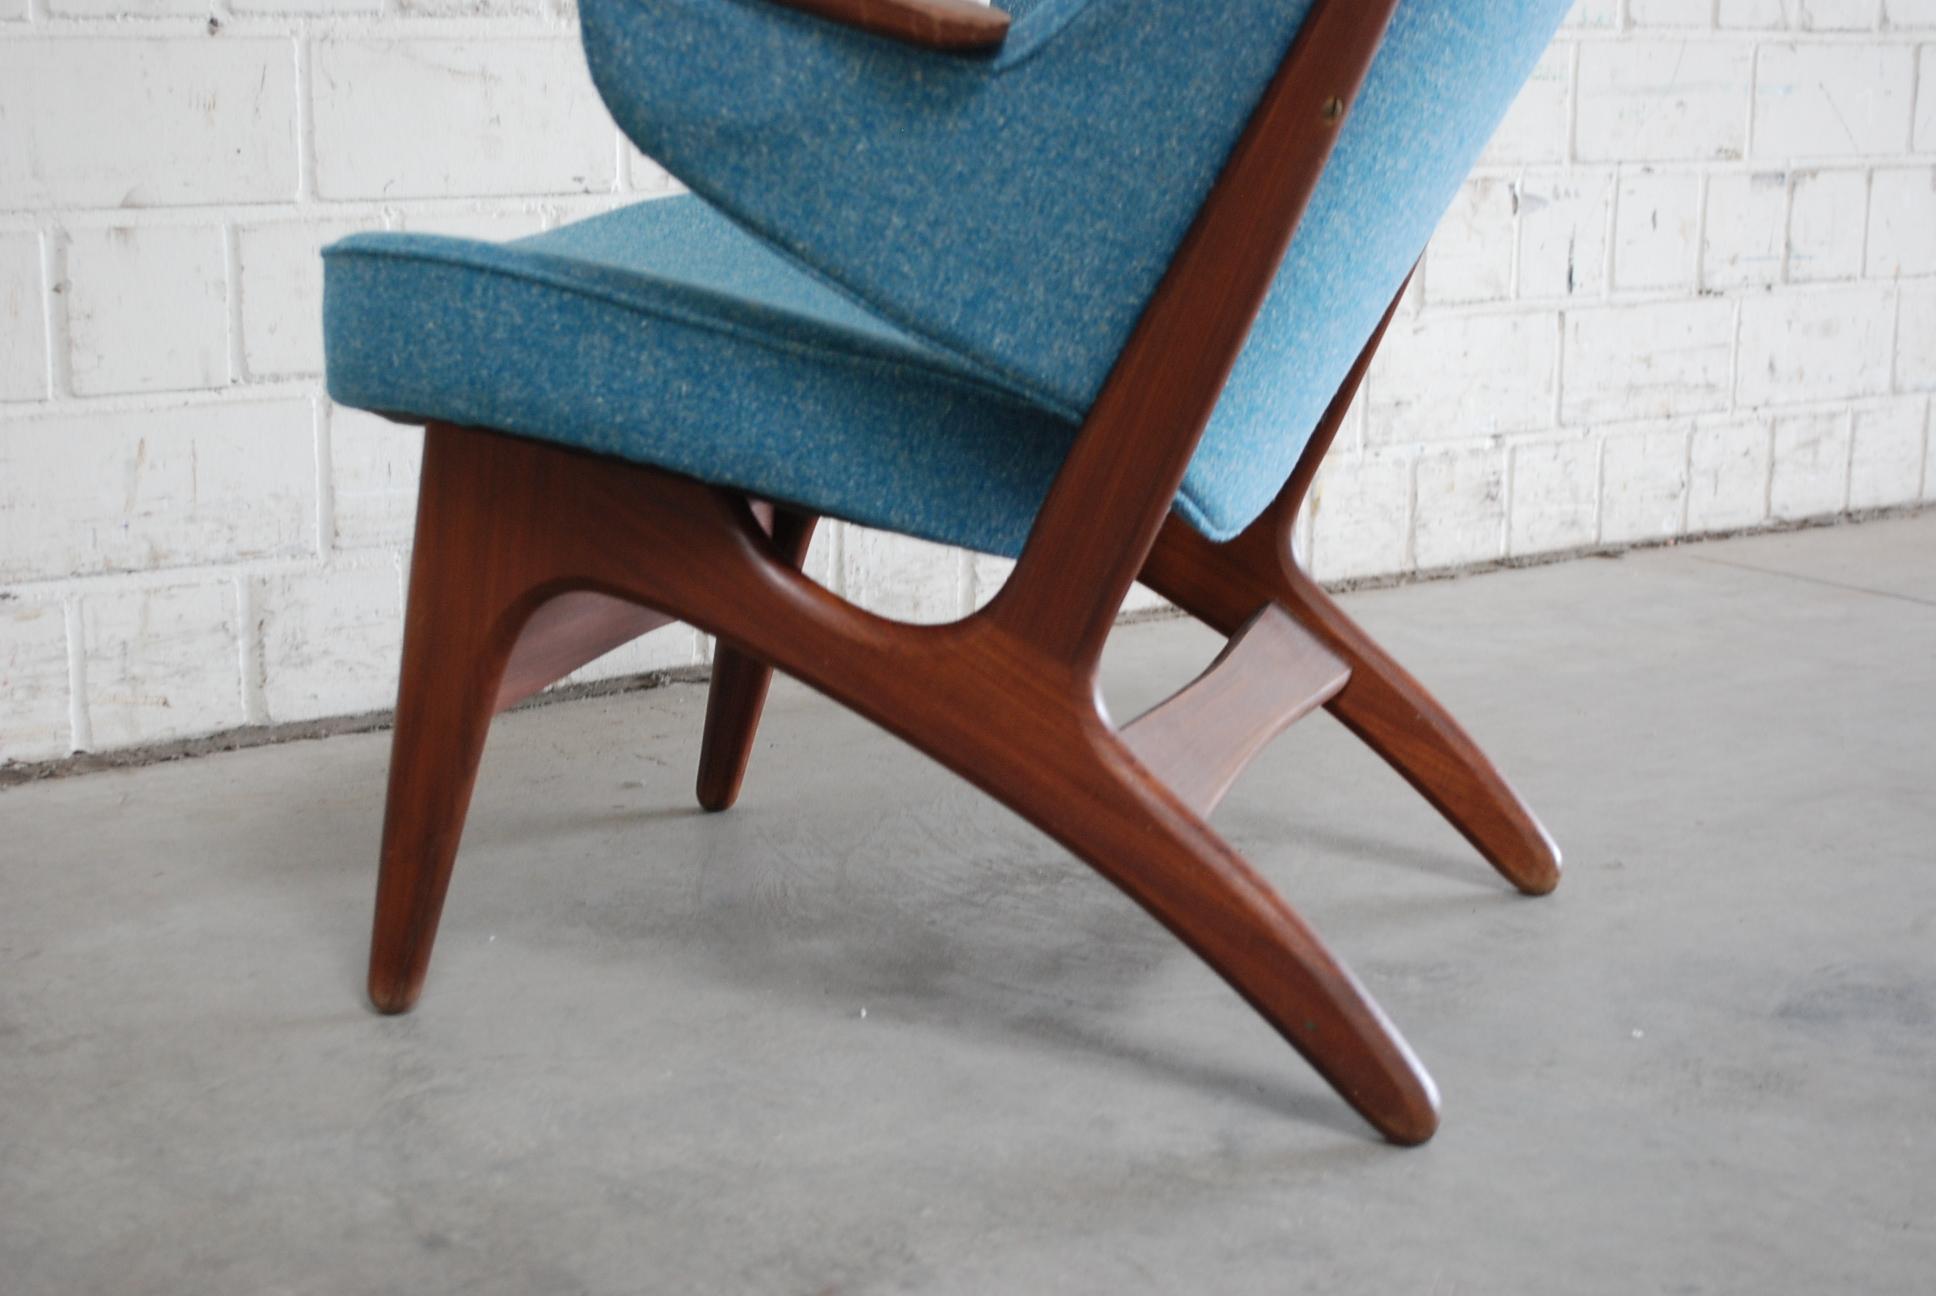 Fabric Carl Edward Matthes Pair of Danish Modern Easy Lounge Chair, 1960s For Sale